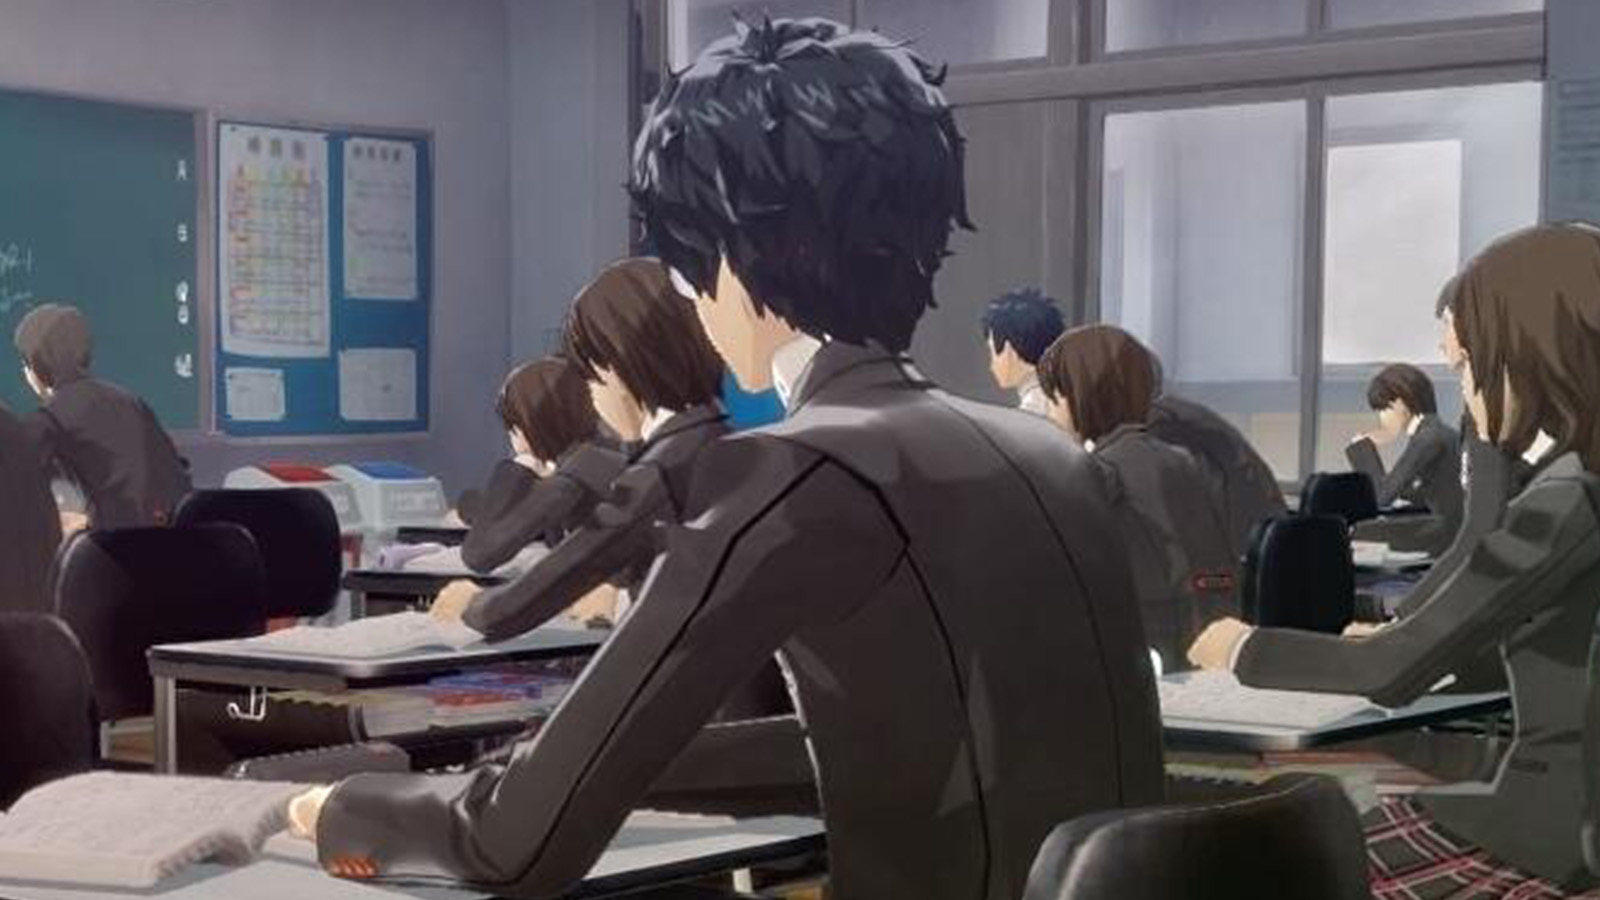 Persona 5 Royal Classroom Answers Guide : r/Persona5